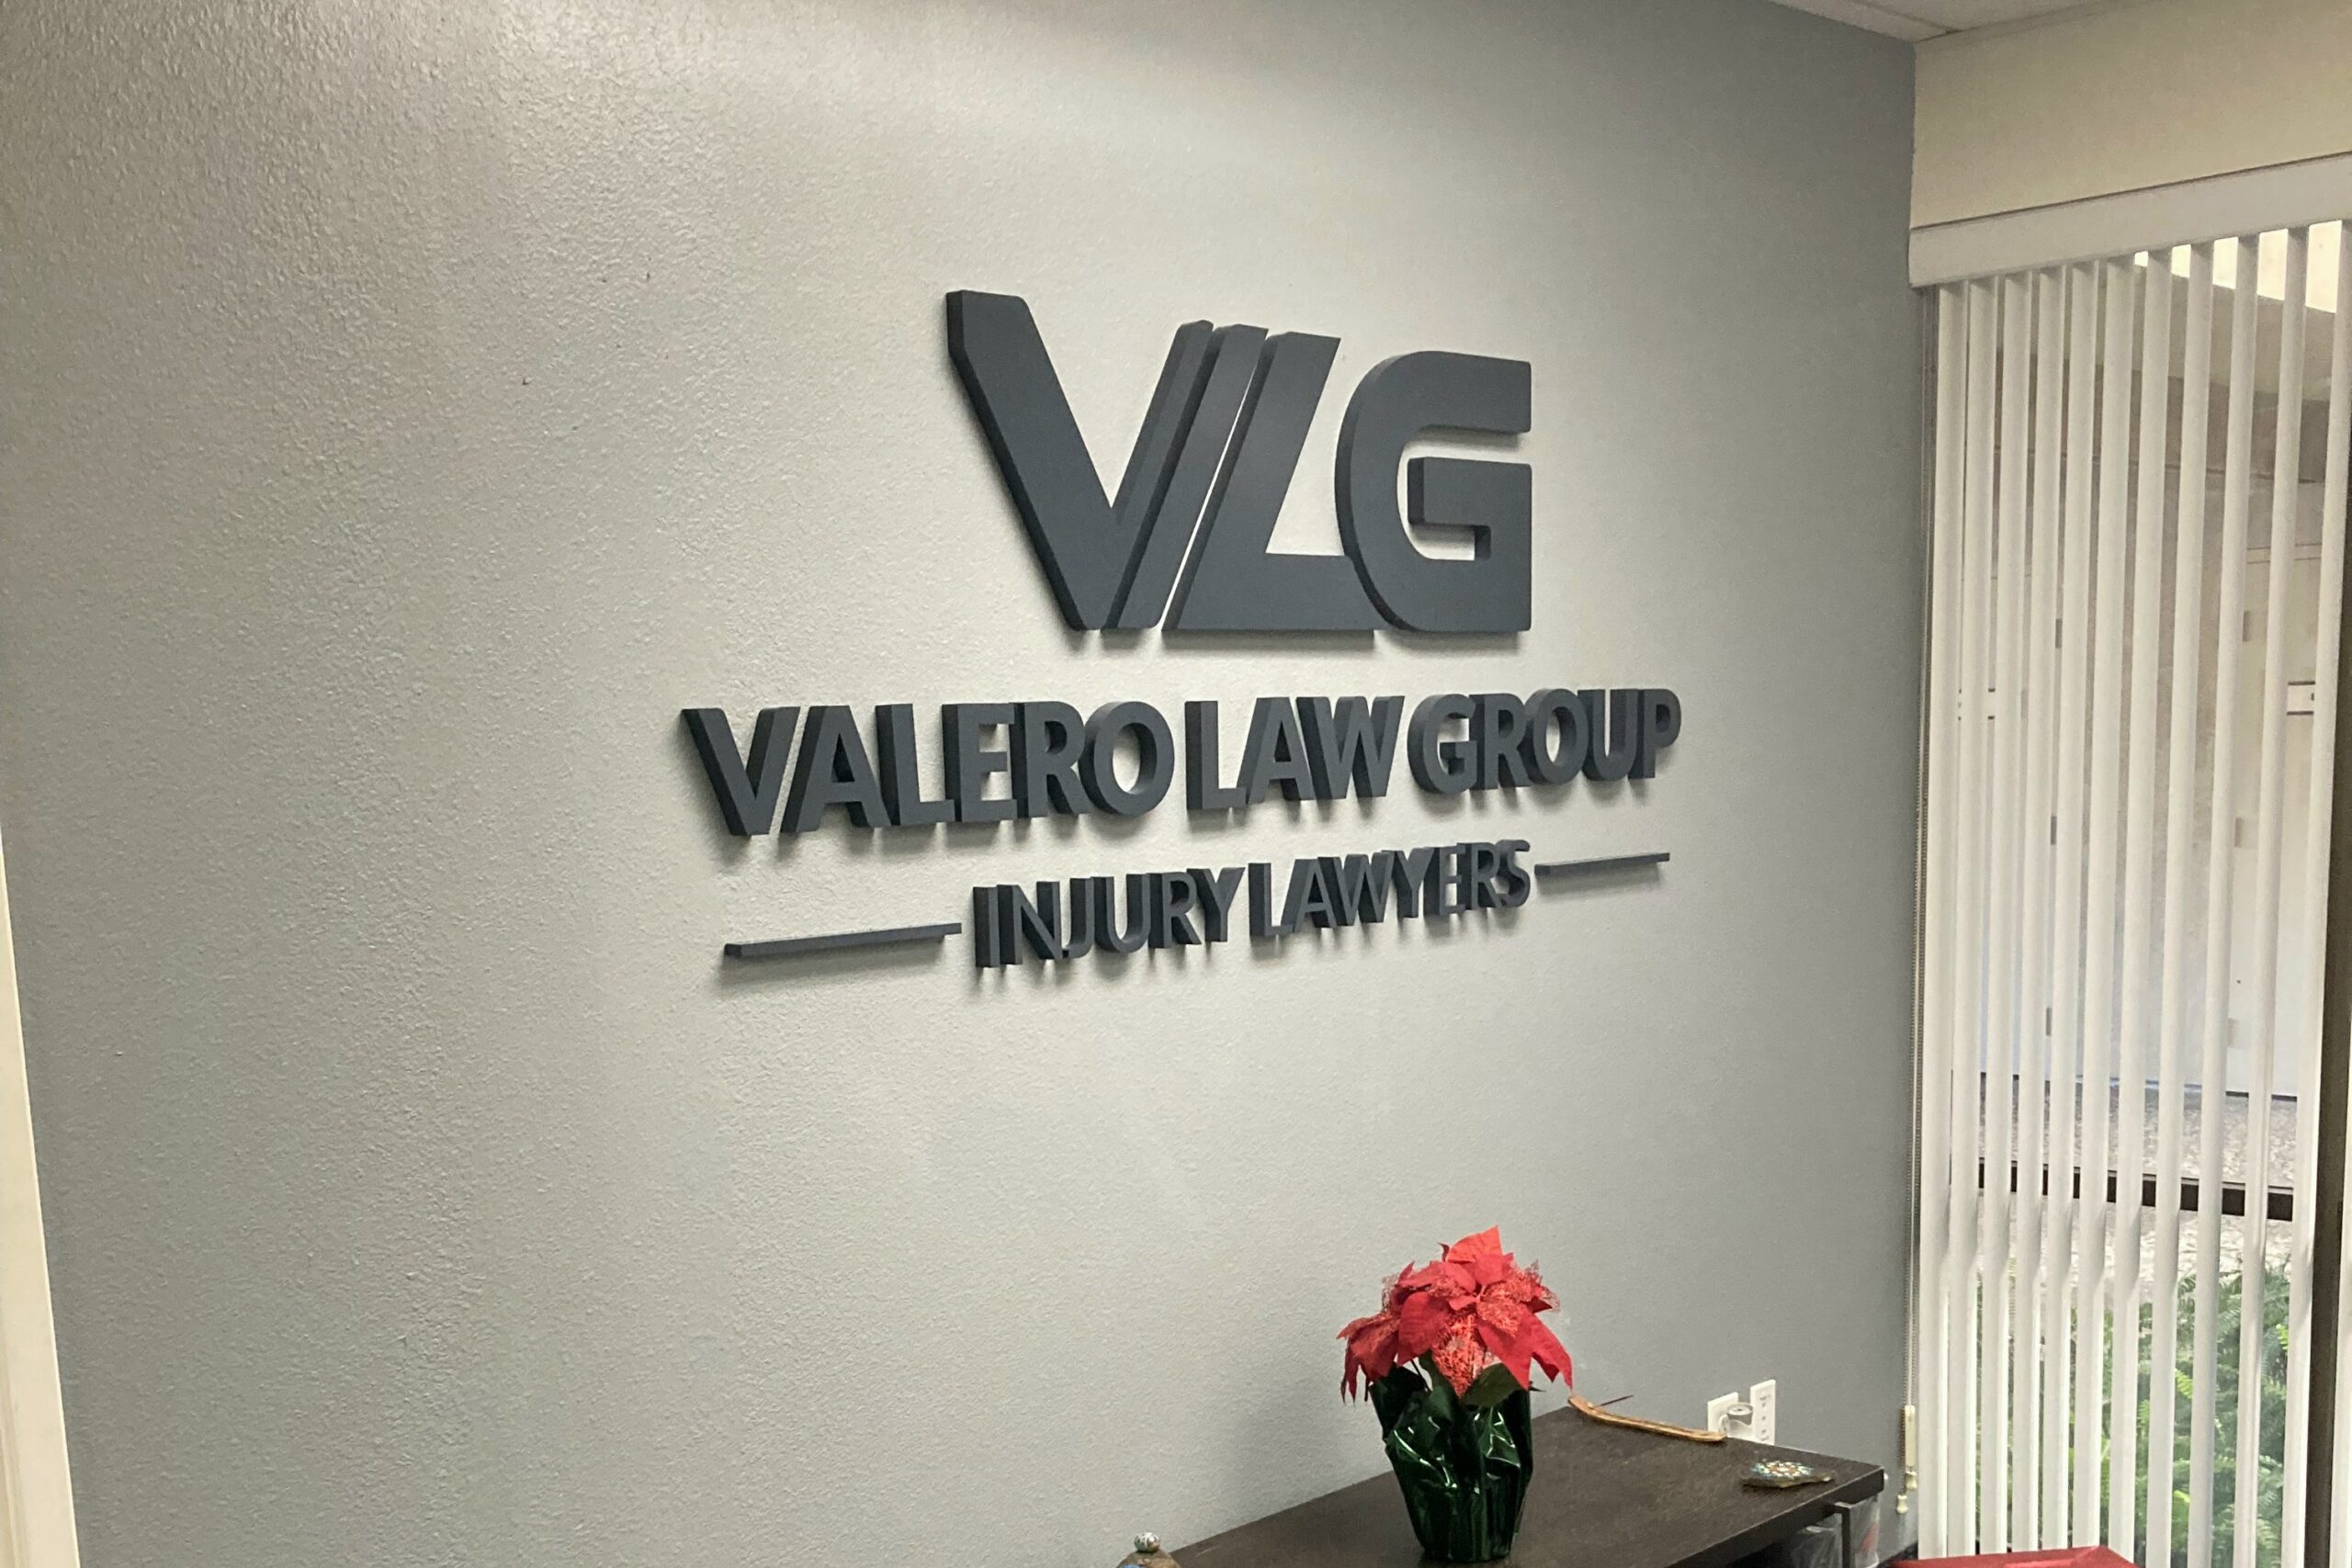 Multi-branch Valero Law Group lobby sign project